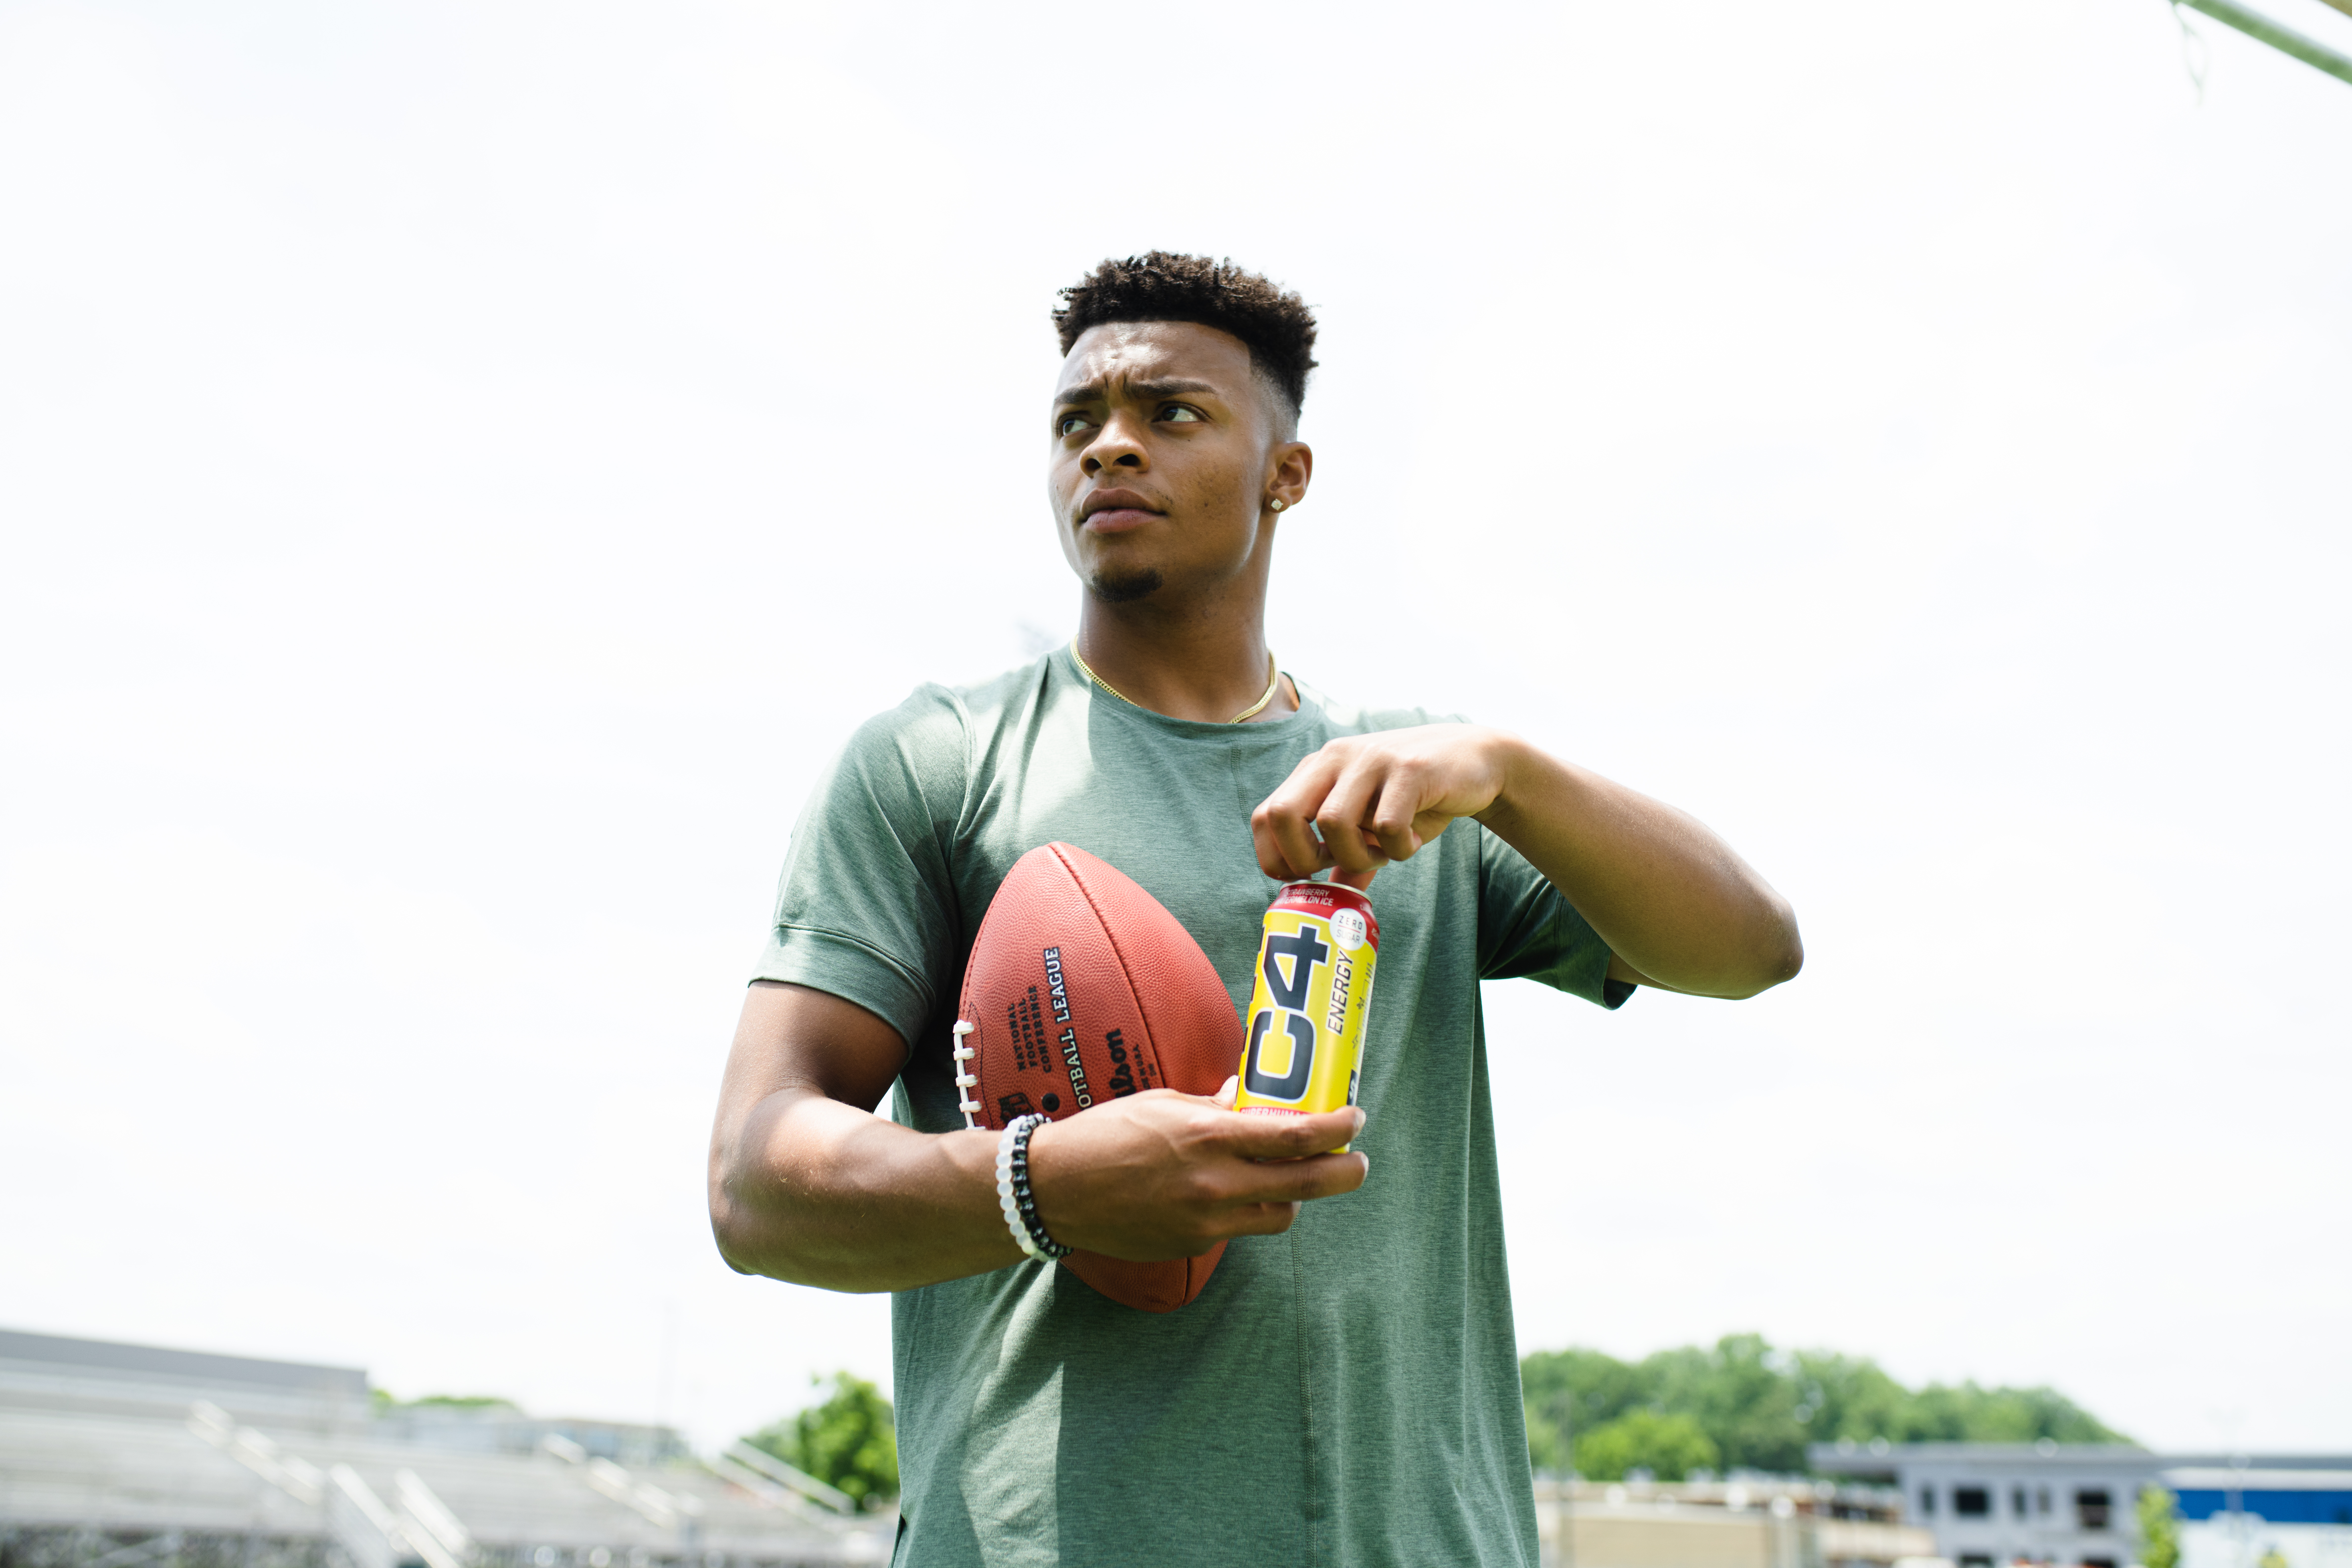 Interview: Justin Fields on His Reebok Deal